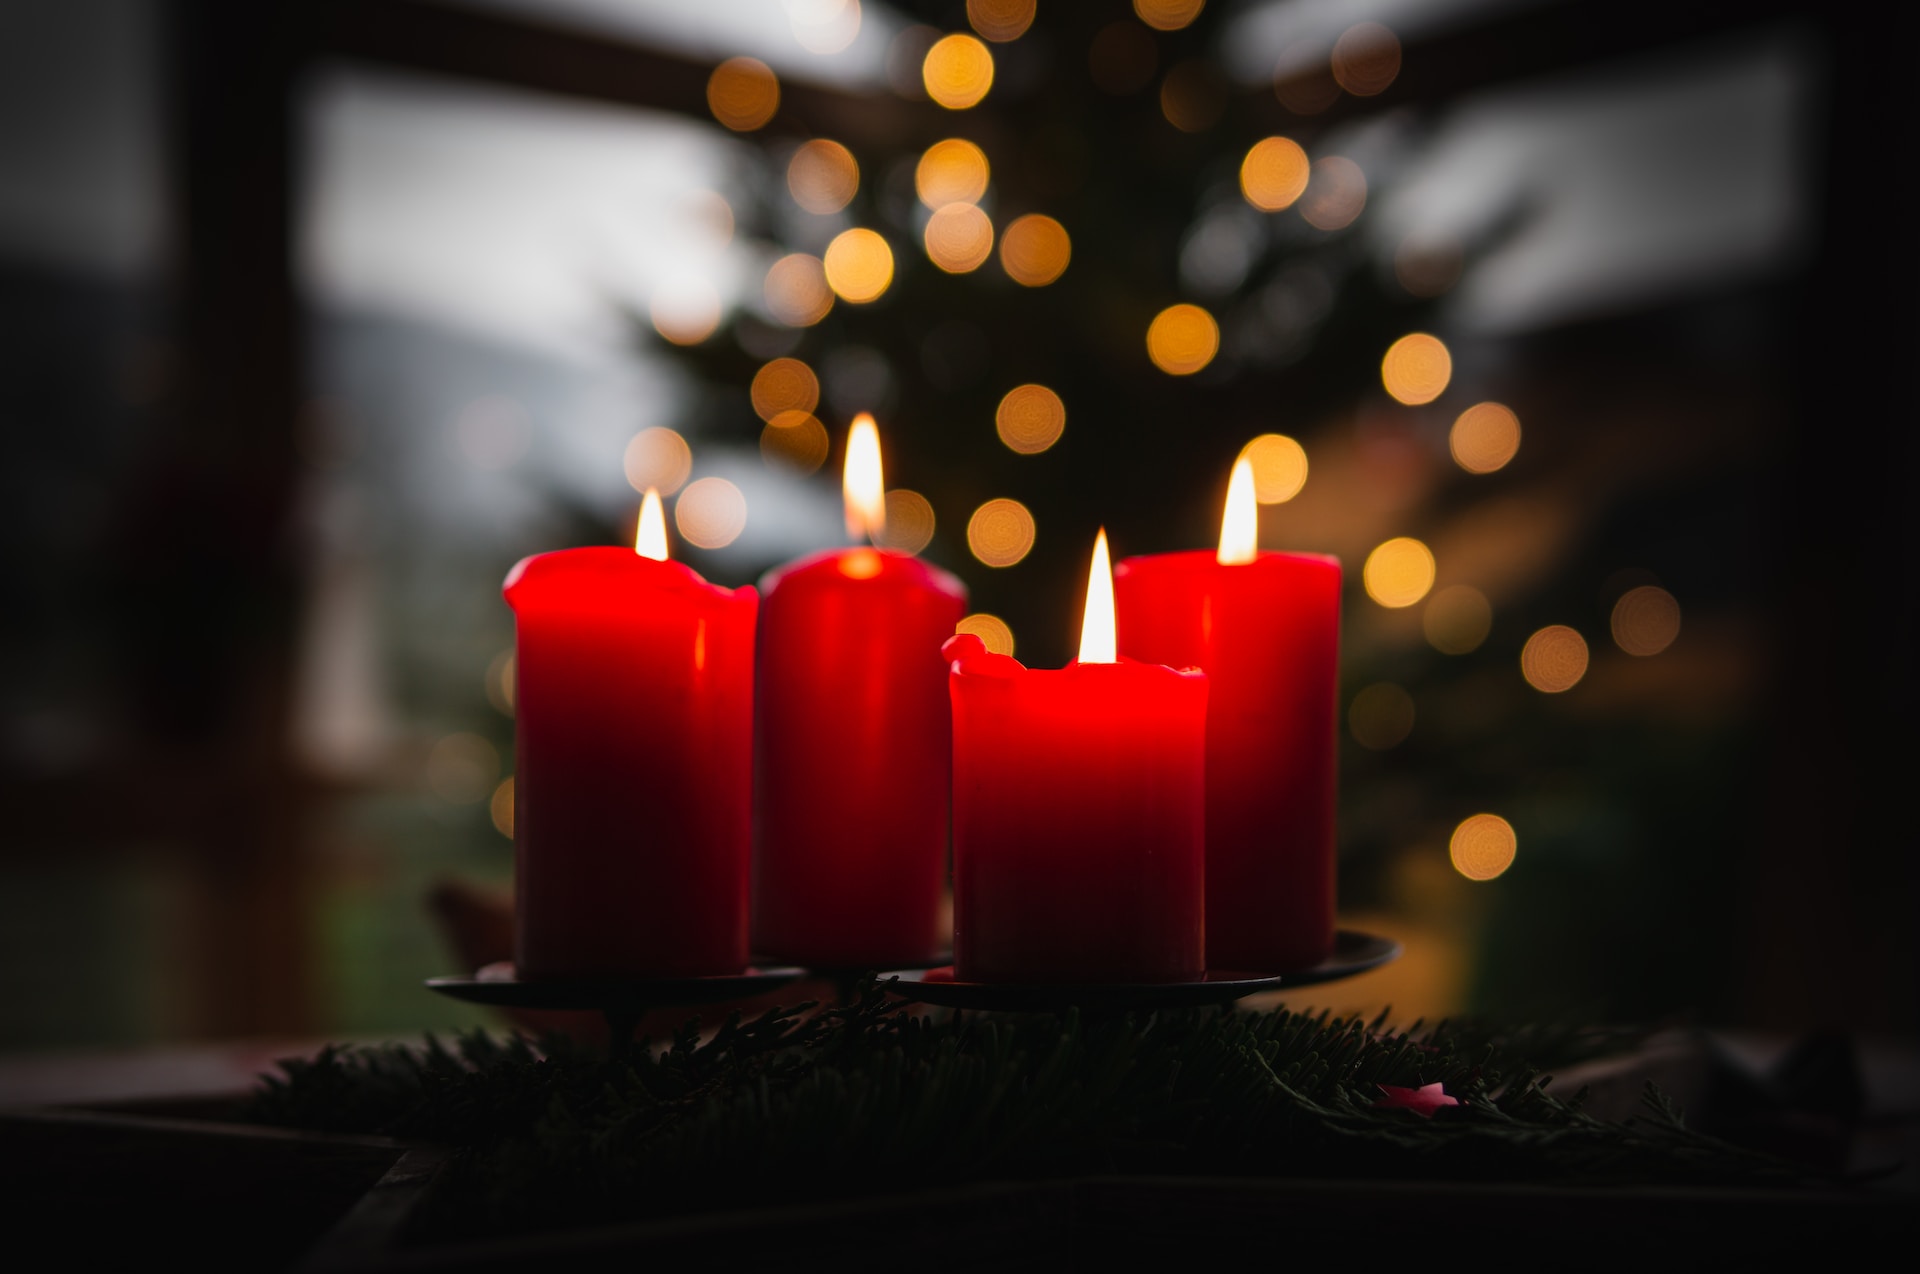 Advent wreath is an important part of the Christmas traditions in the Czech Republic.